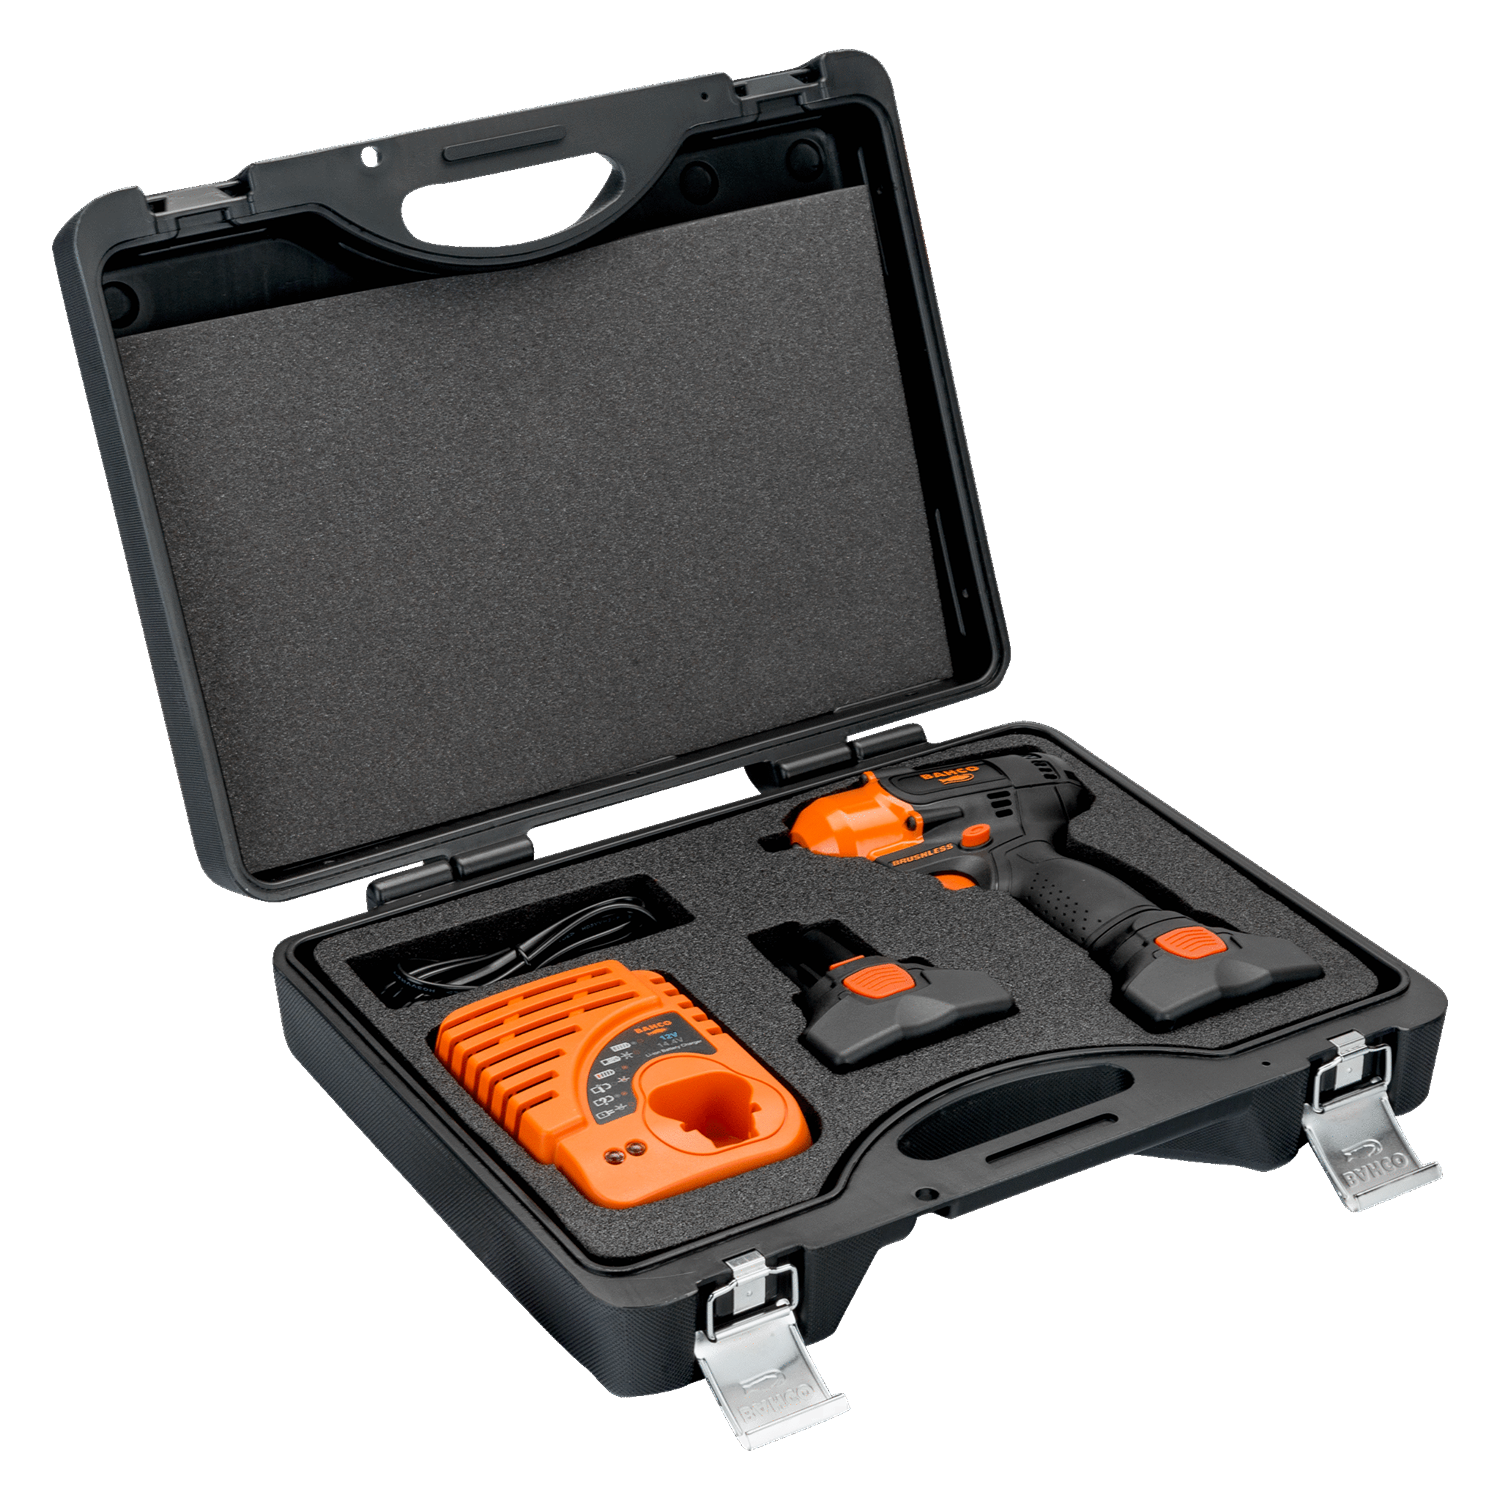 BAHCO BCL32IW1K1 14.4 V 3/8” Cordless Impact Wrench Kit - Premium 3/8” Cordless Impact Wrench Kit from BAHCO - Shop now at Yew Aik.